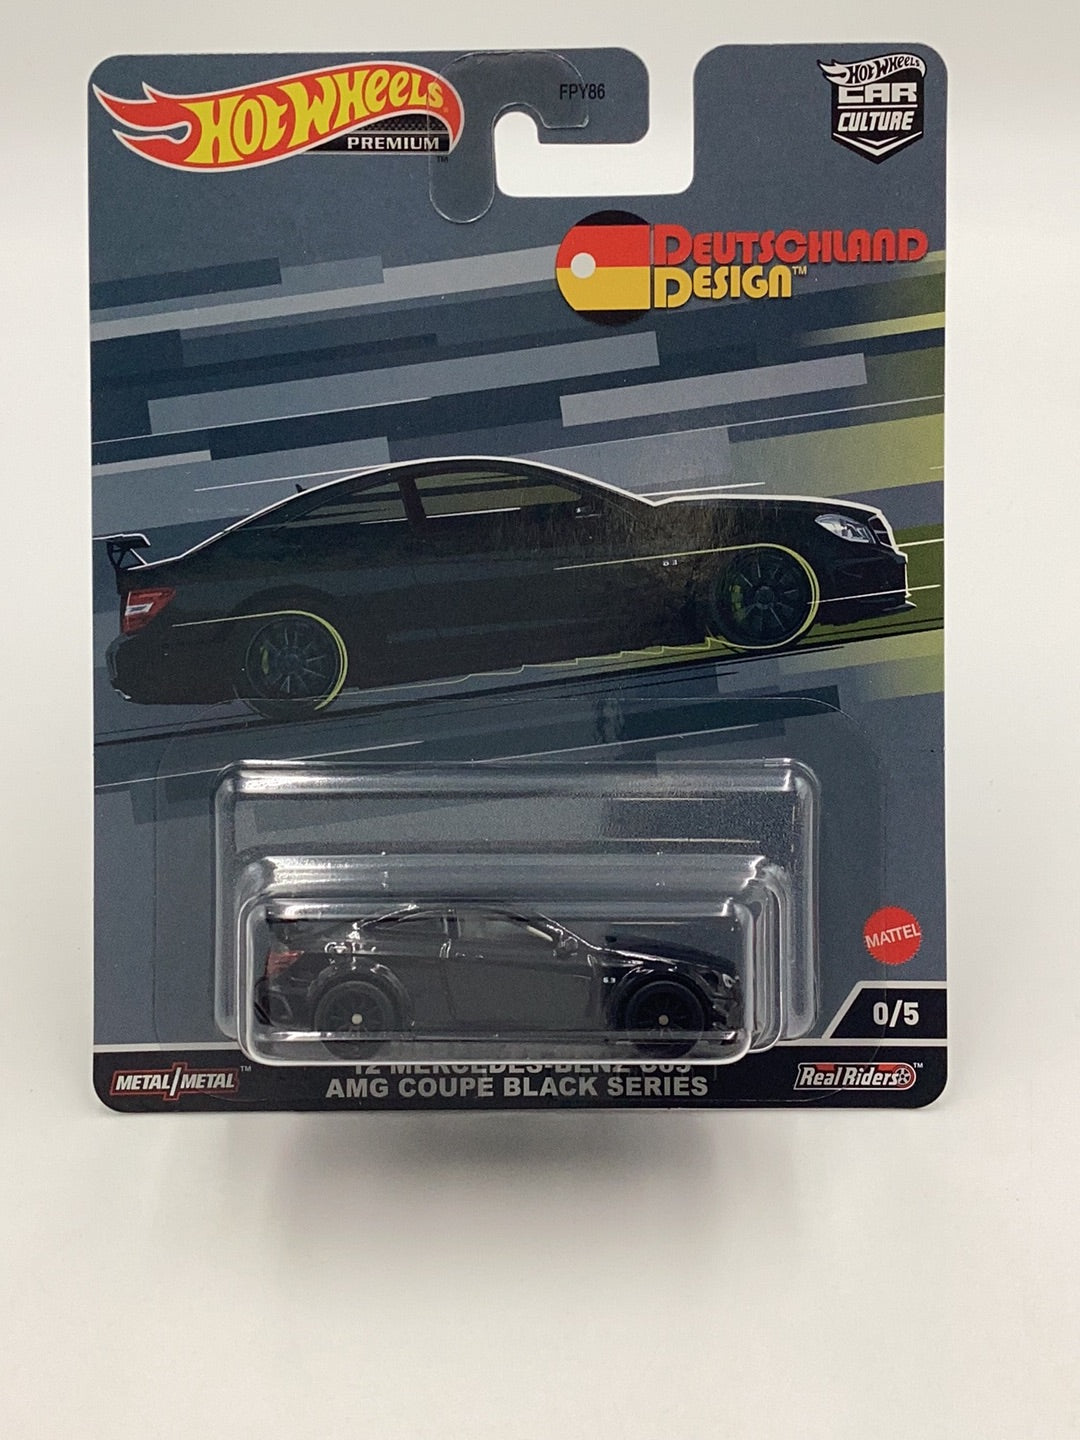 2022 Hot wheels car culture Deutschland Design 12 Mercedes Benz C63 AMG Coupe Black Series chase 0/5 with protector